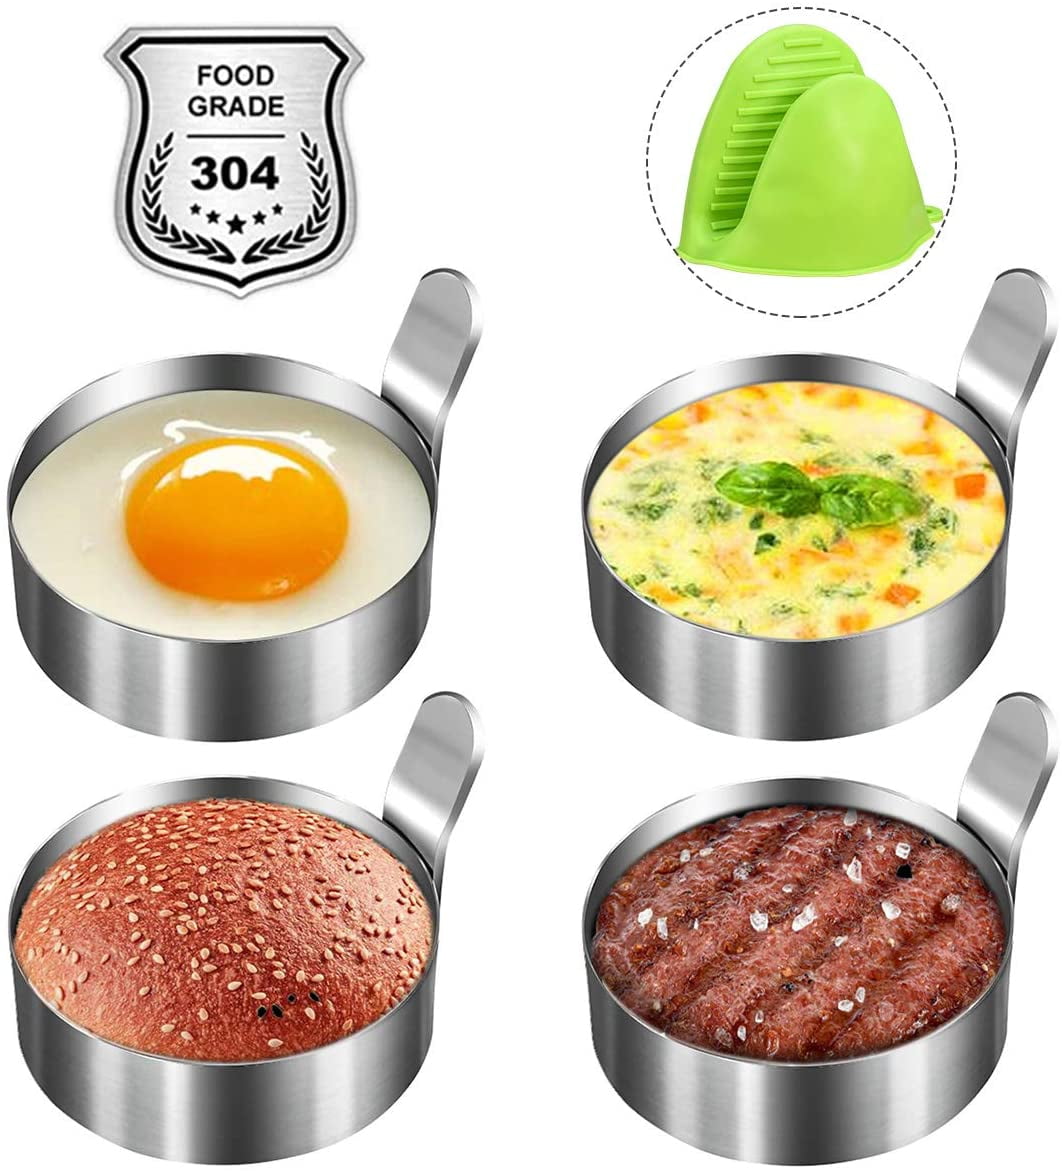 Egg Ring Omelette Mold Non-Stick Stainless Steel Frying Cooking Pancake Sandwich Griddle Breakfast 4PCS 